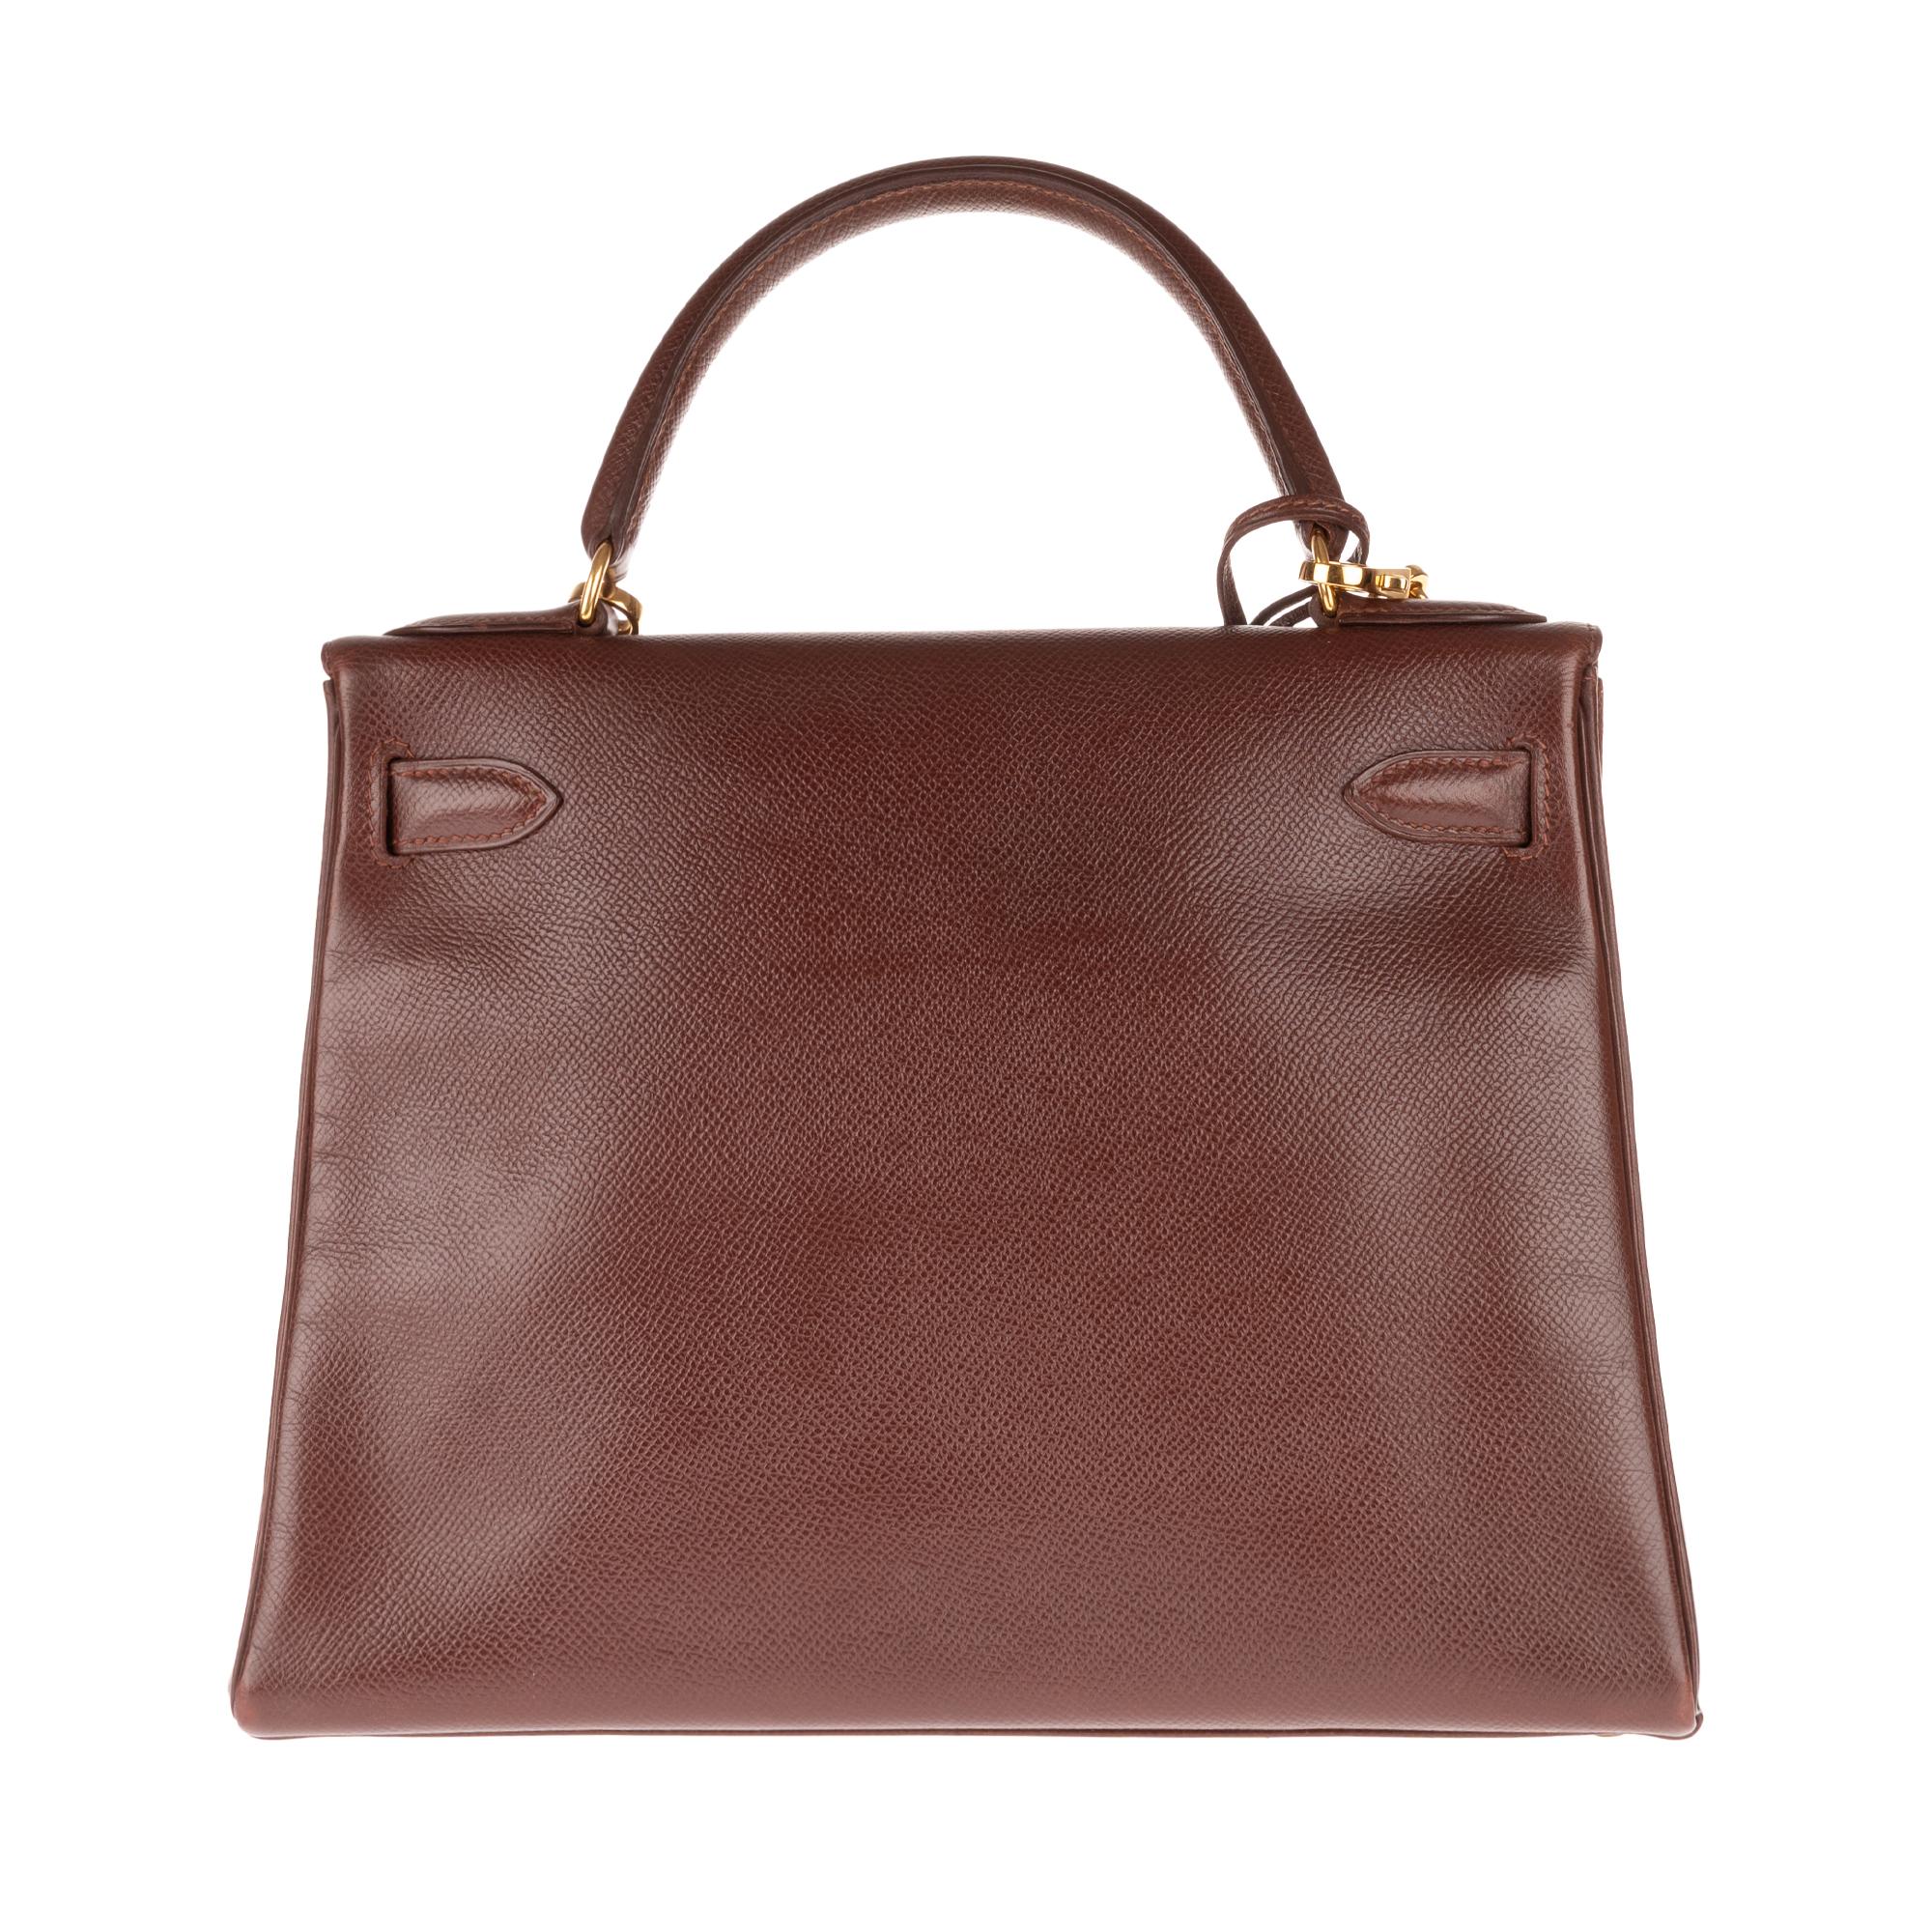 Gorgeous handbag Hermes Kelly 28 back in Brown Courchevel leather, gold plated metal hardware, simple handle in brown courchevel leather, removable shoulder strap in brown courchevel leather allowing a handheld or shoulder.

Closure by